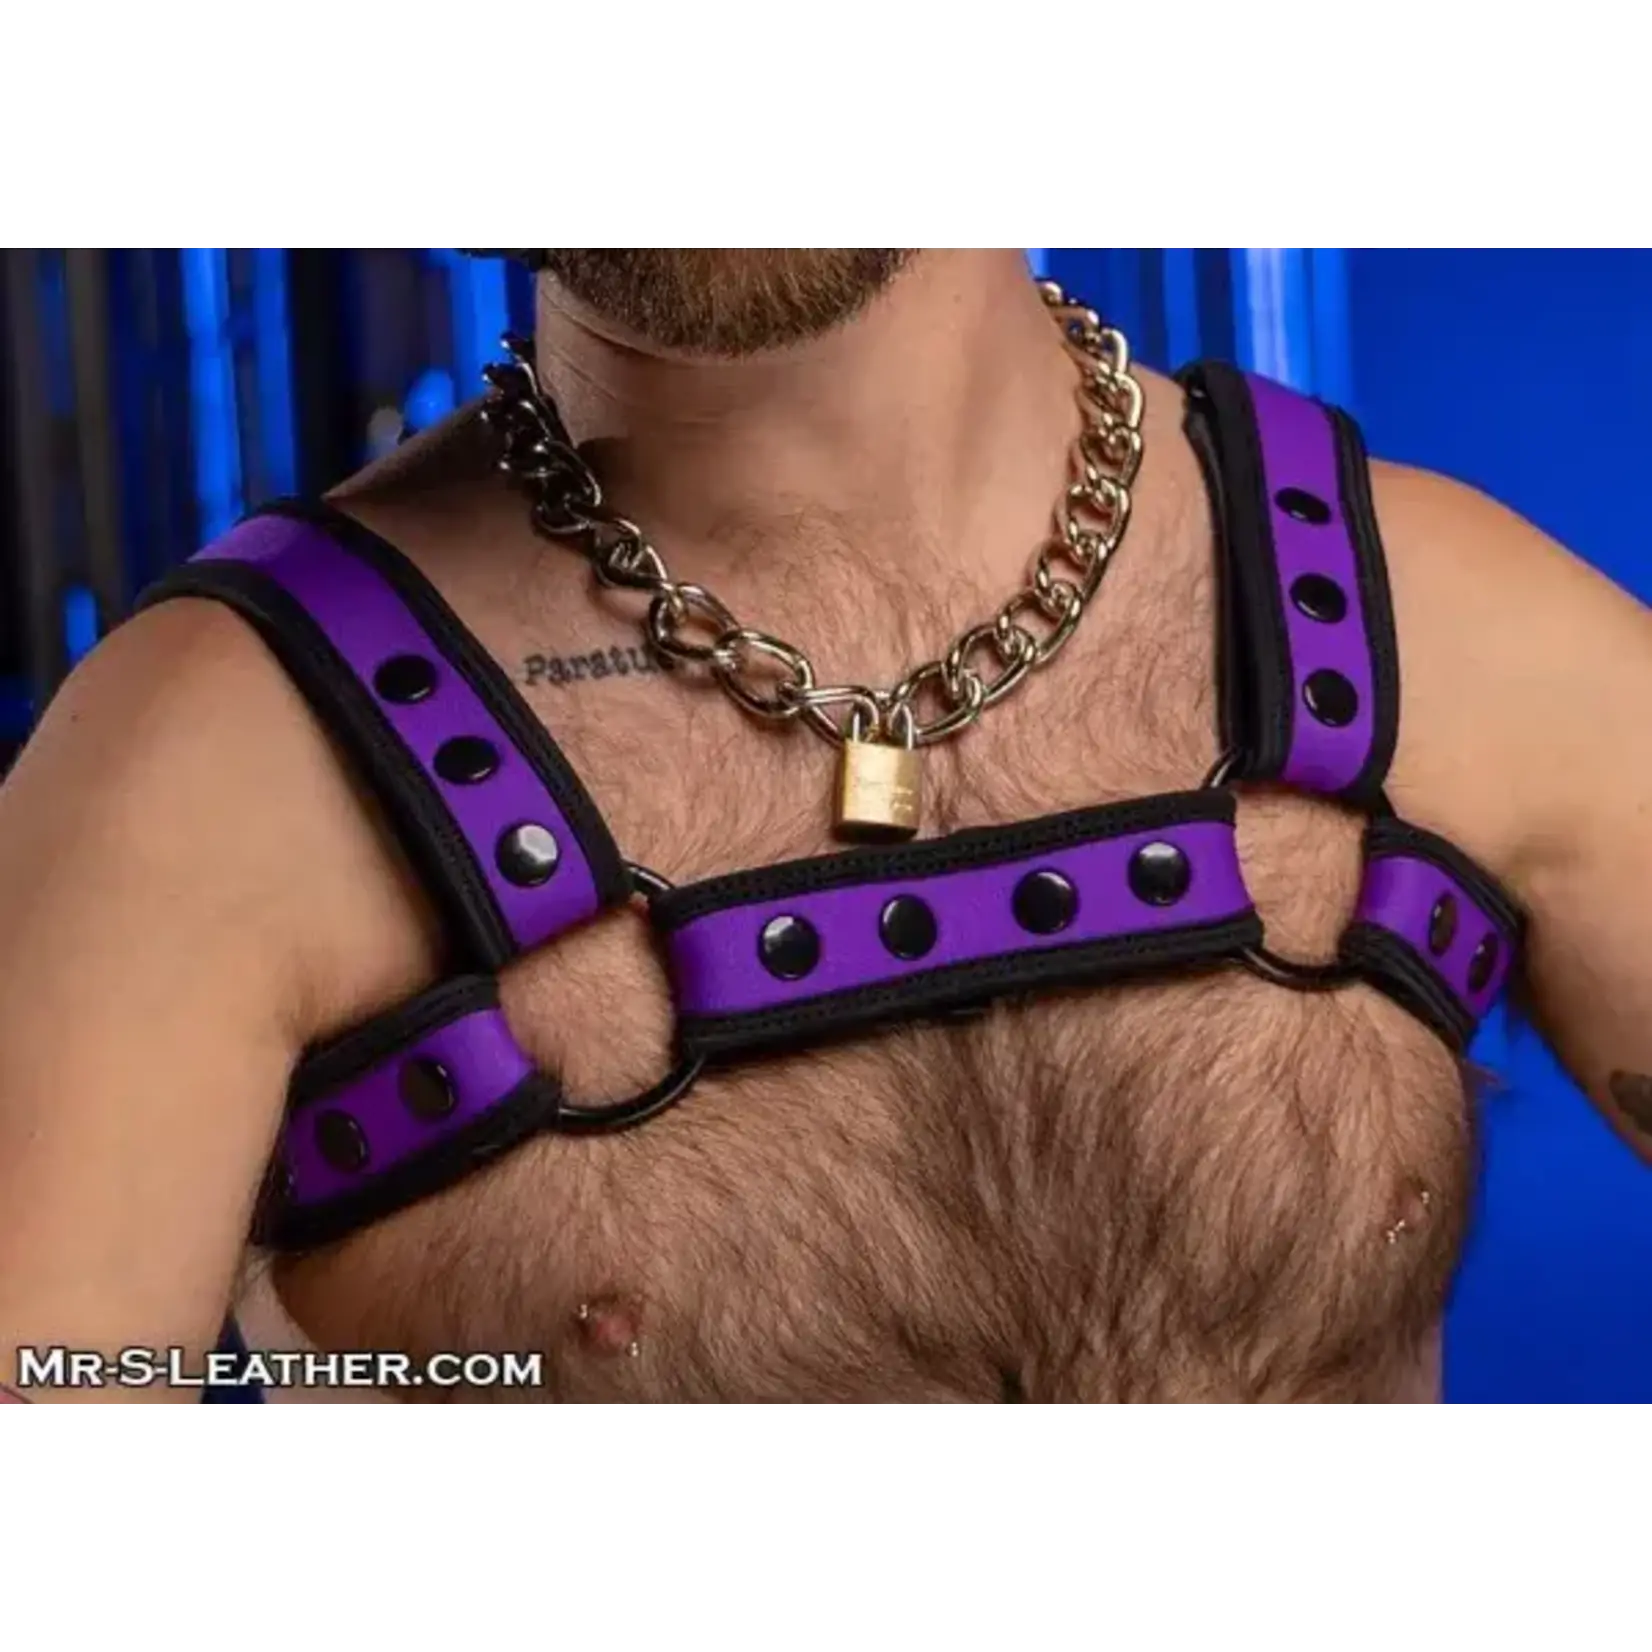 Mr. S Leather Mr. S Leather - Neo Bold Color Bulldog Harness